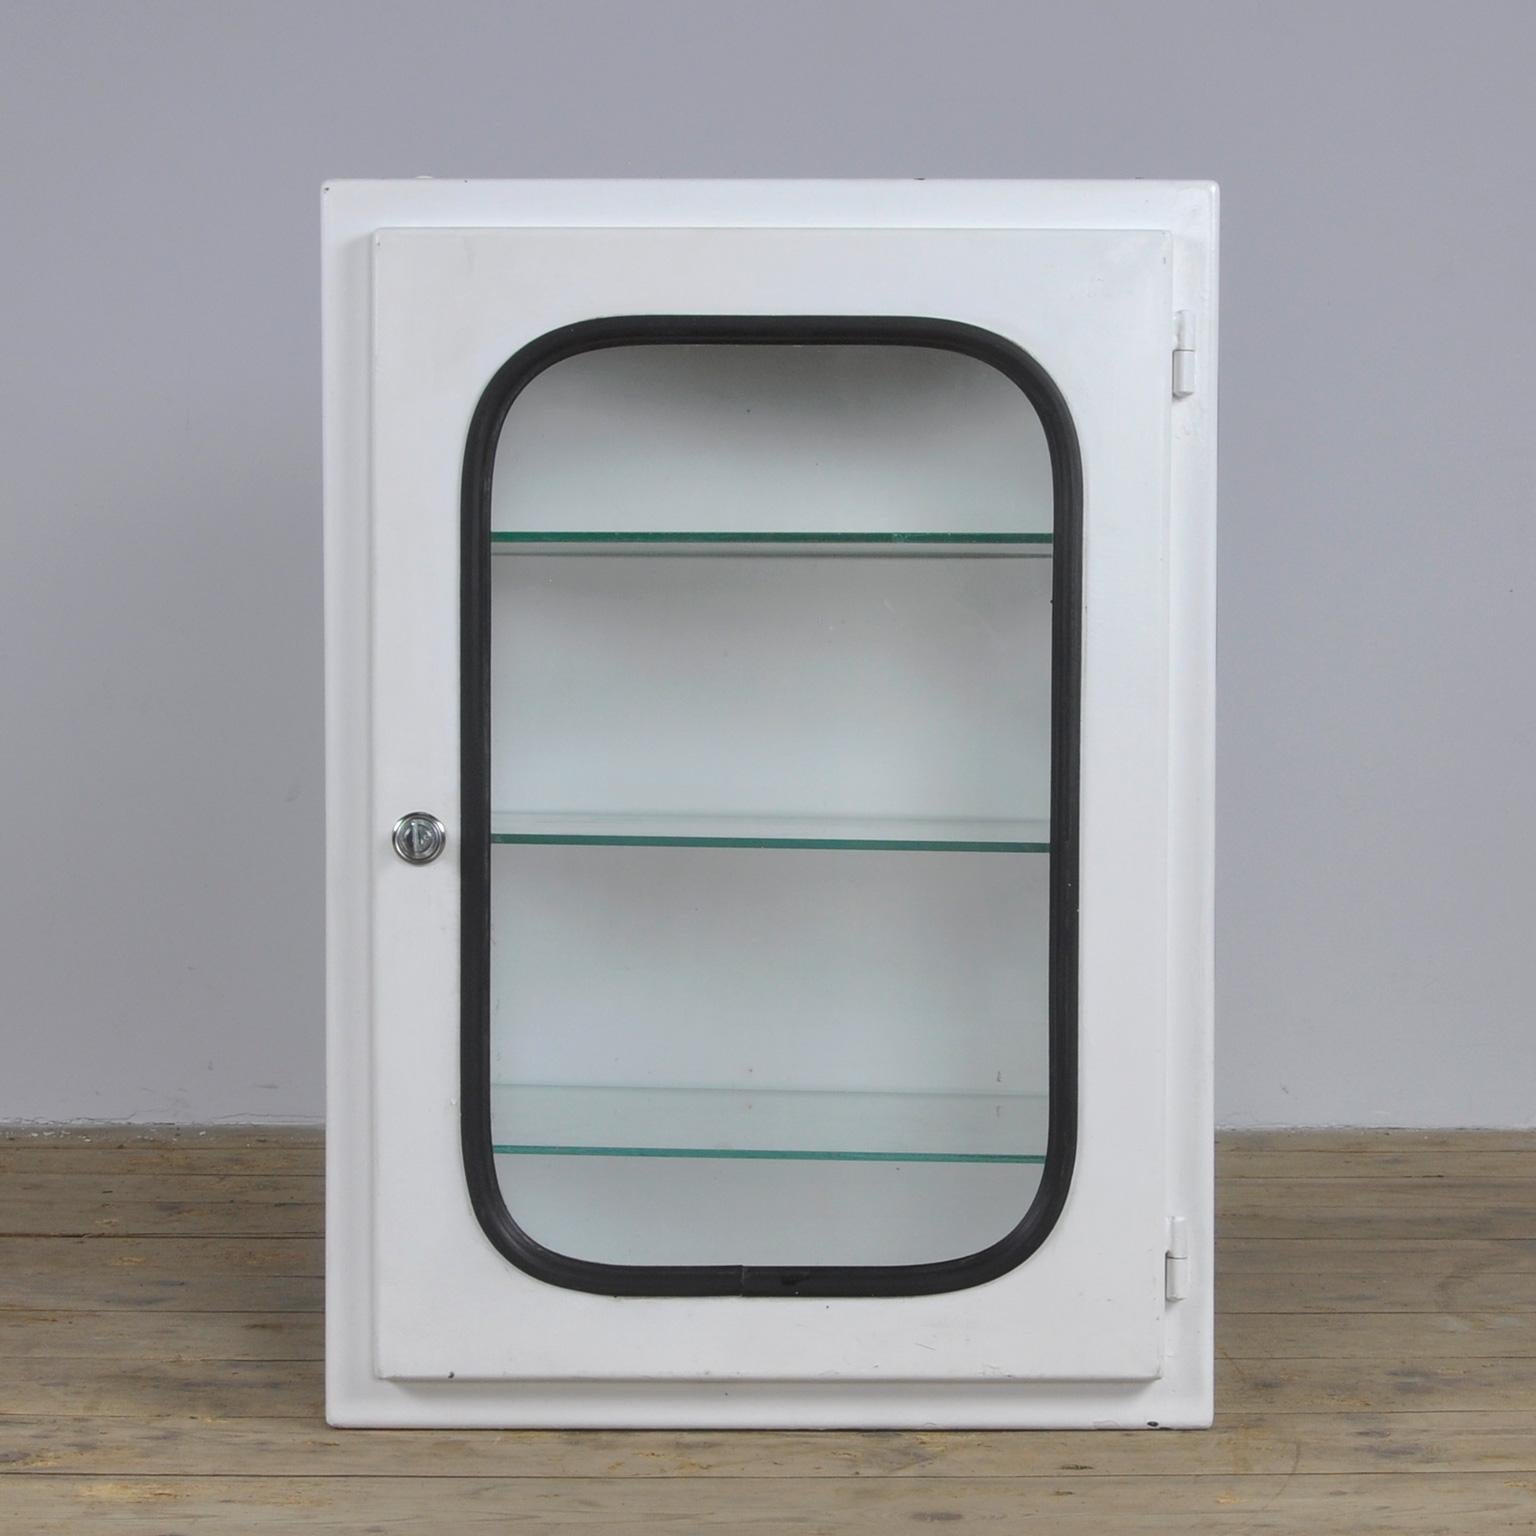 This medicine cabinet was designed in the 1970s and produced, circa 1975 in Hungary. It is made of iron and glass and is held by a black rubber strip. The cabinet comes with three adjustable glass shelves.
The cabinet was used in a hospital in